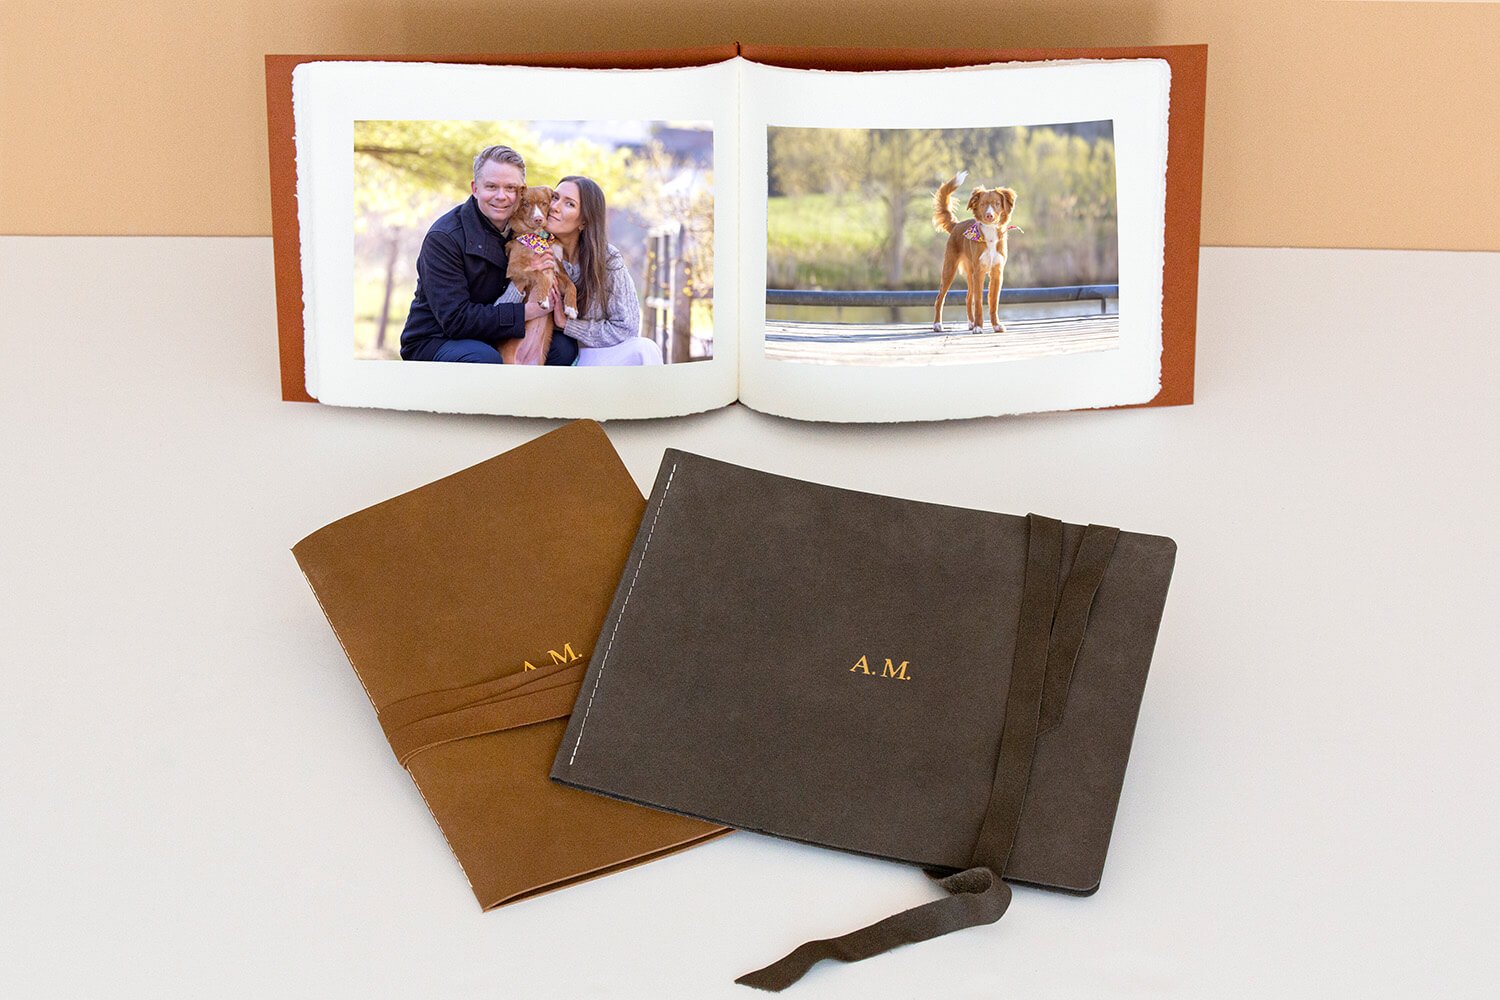 Storybook to display your pet and family photos